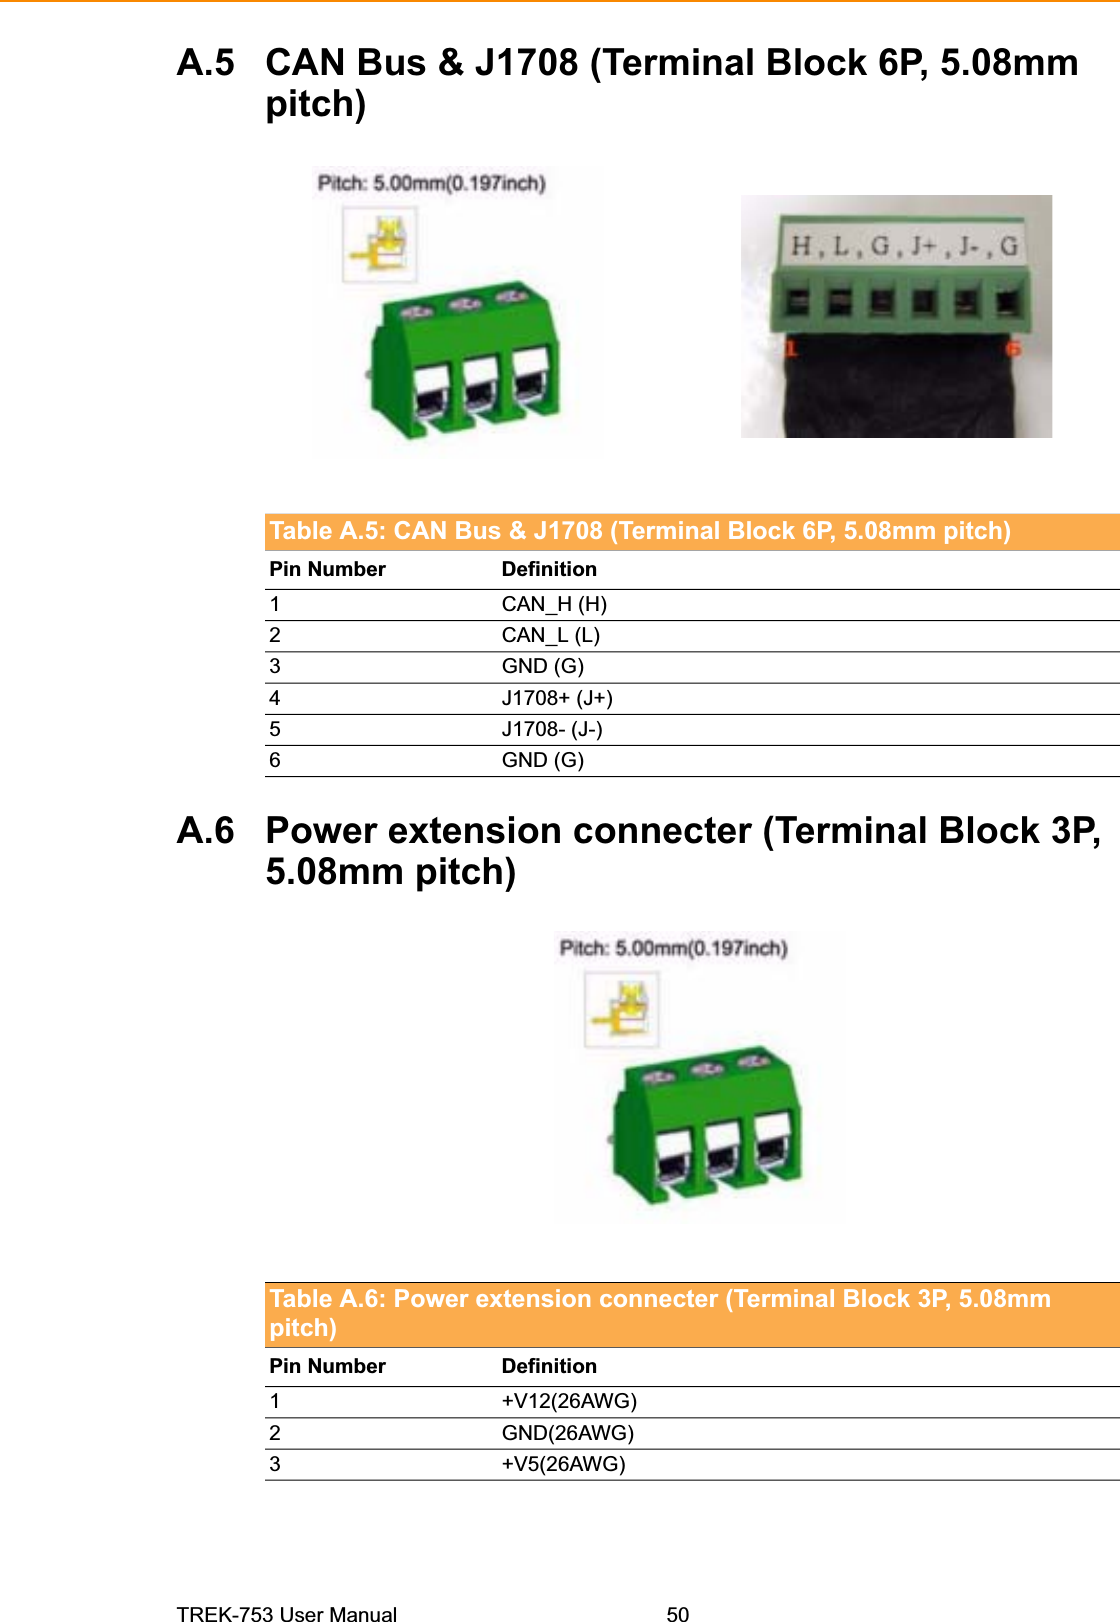 A.5 CAN Bus &amp; J1708 (Terminal Block 6P, 5.08mm pitch)Table A.5: CAN Bus &amp; J1708 (Terminal Block 6P, 5.08mm pitch) Pin Number  Definition 1CAN_H (H)2CAN_L (L)3 GND (G) 4 J1708+ (J+) 5 J1708- (J-) 6 GND (G) A.6 Power extension connecter (Terminal Block 3P, 5.08mm pitch) pitch)Table A.6: Power extension connecter (Terminal Block 3P, 5.08mm Pin Number  Definition 1 +V12(26AWG) 2 GND(26AWG) 3 +V5(26AWG) TREK-753 User Manual  50 